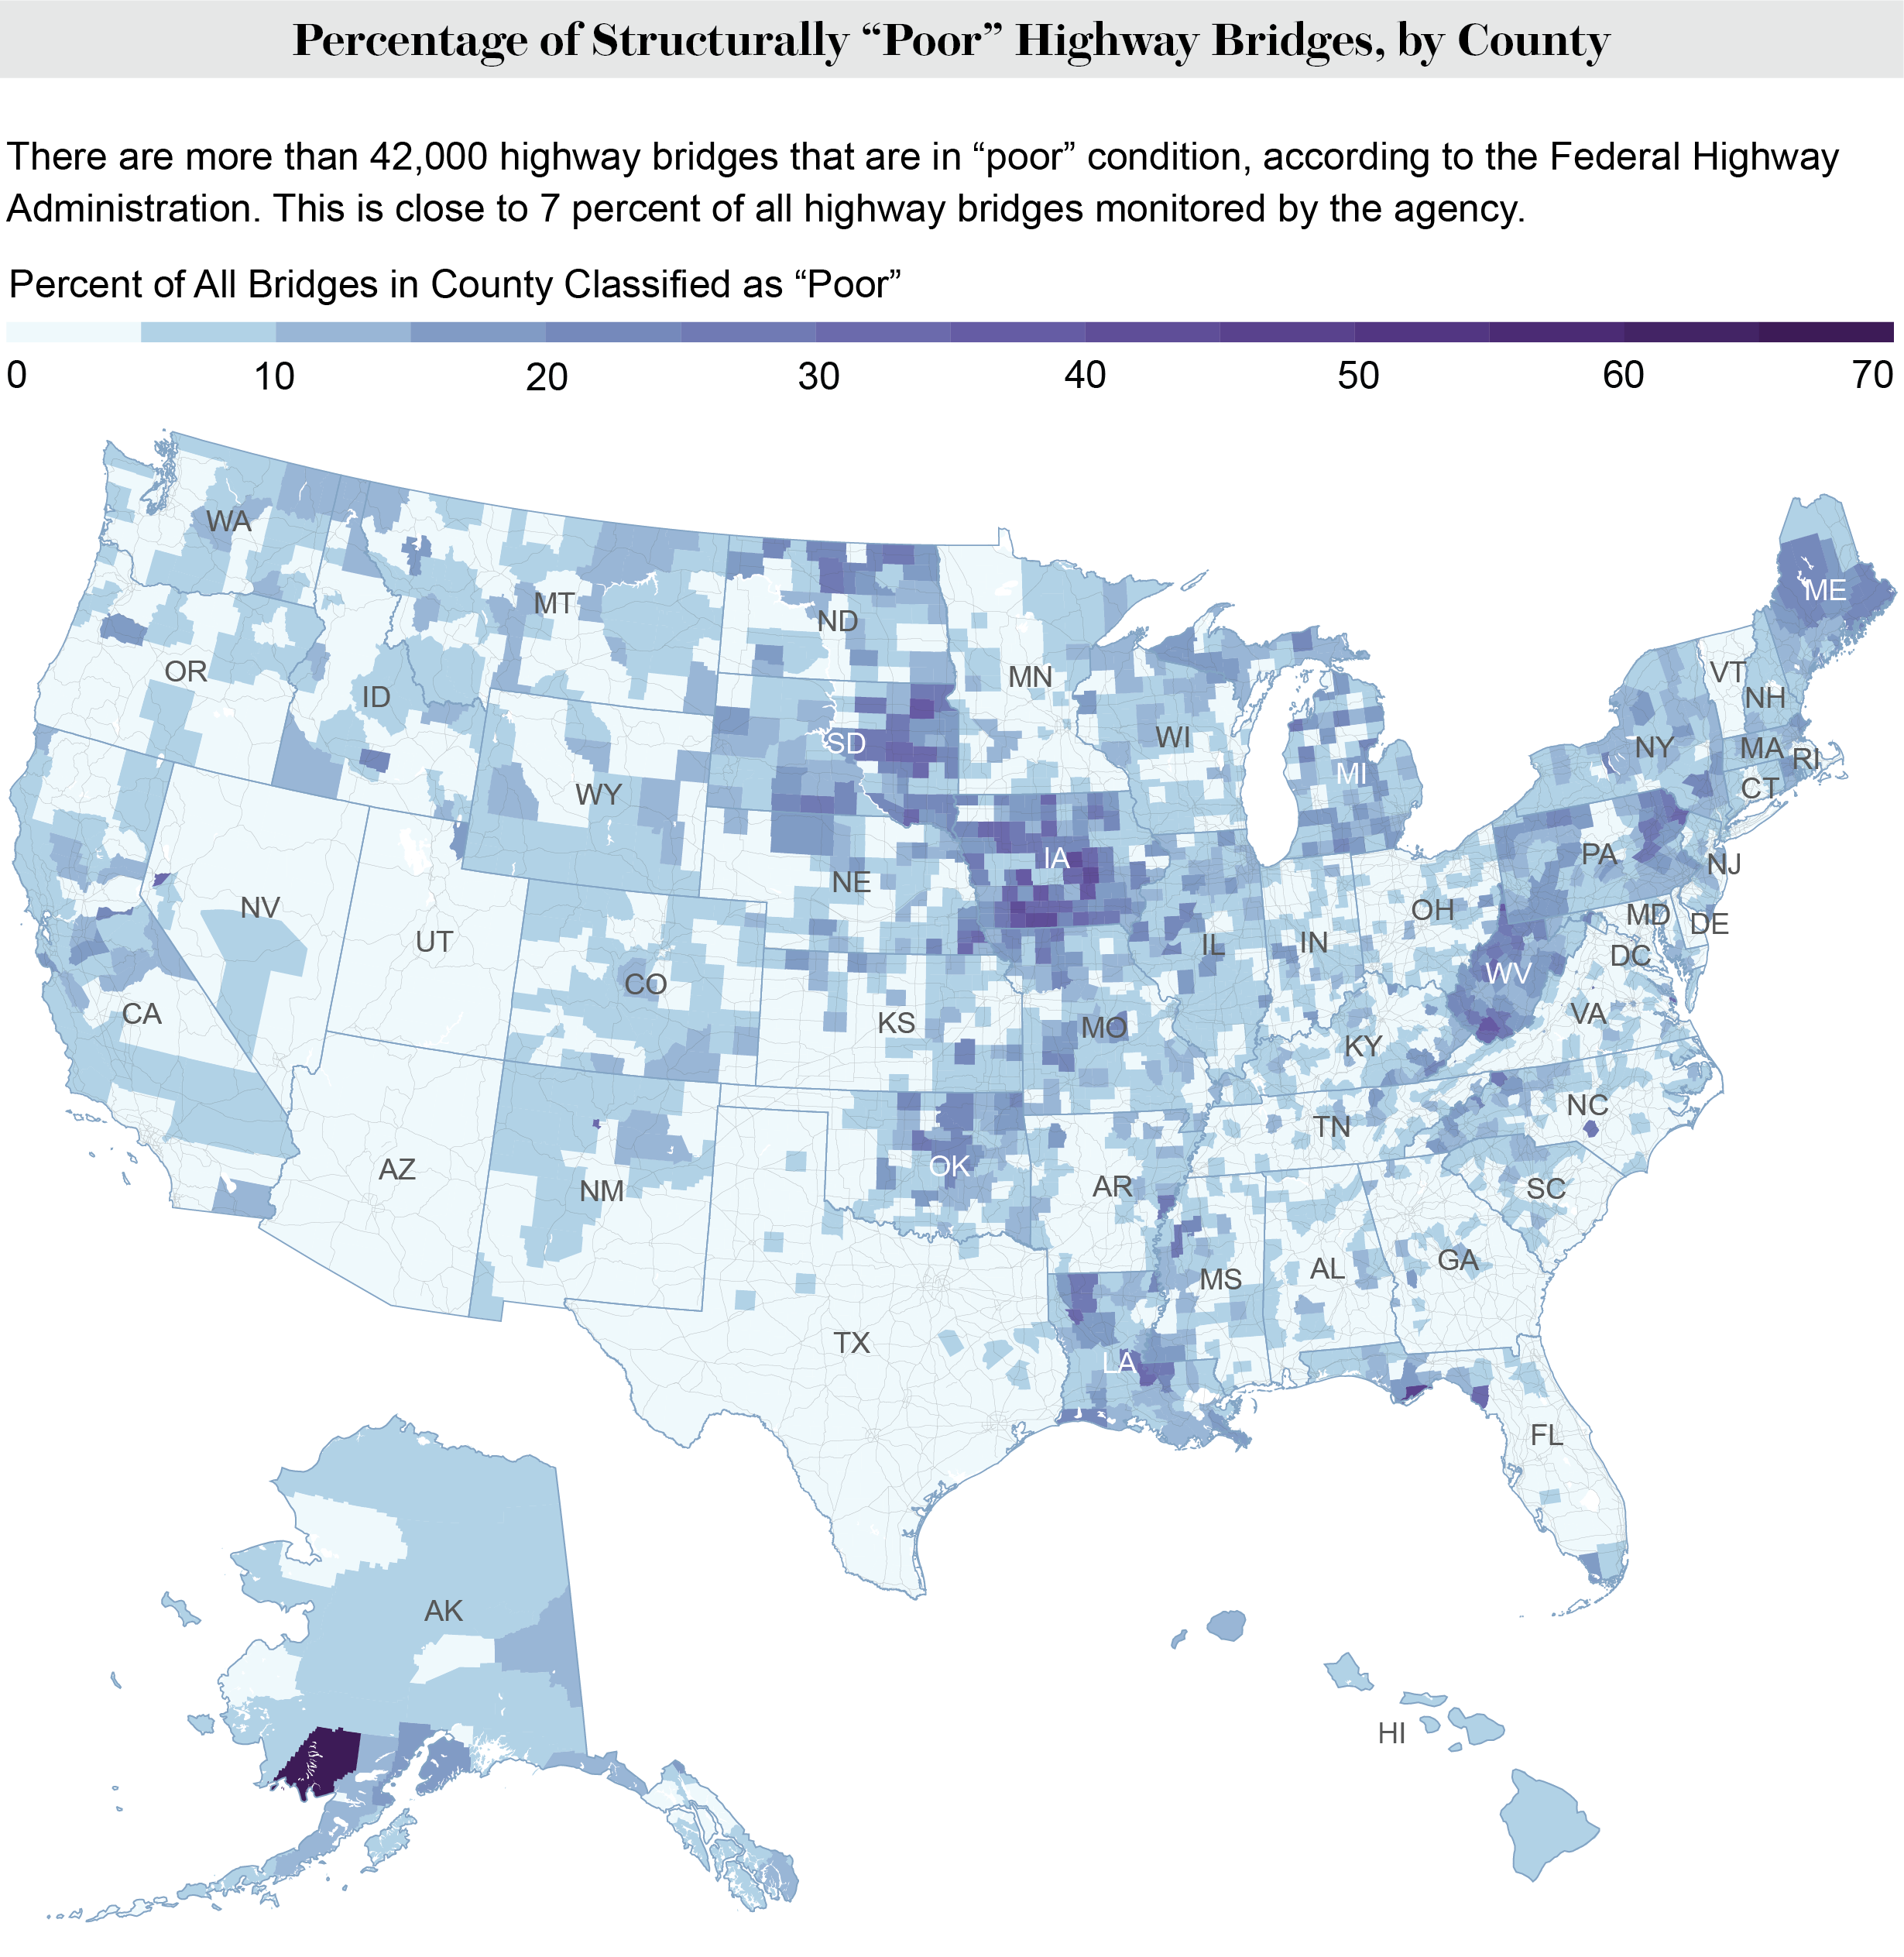 A county map of the U.S. shows the share of “poor” highway bridges in each county.